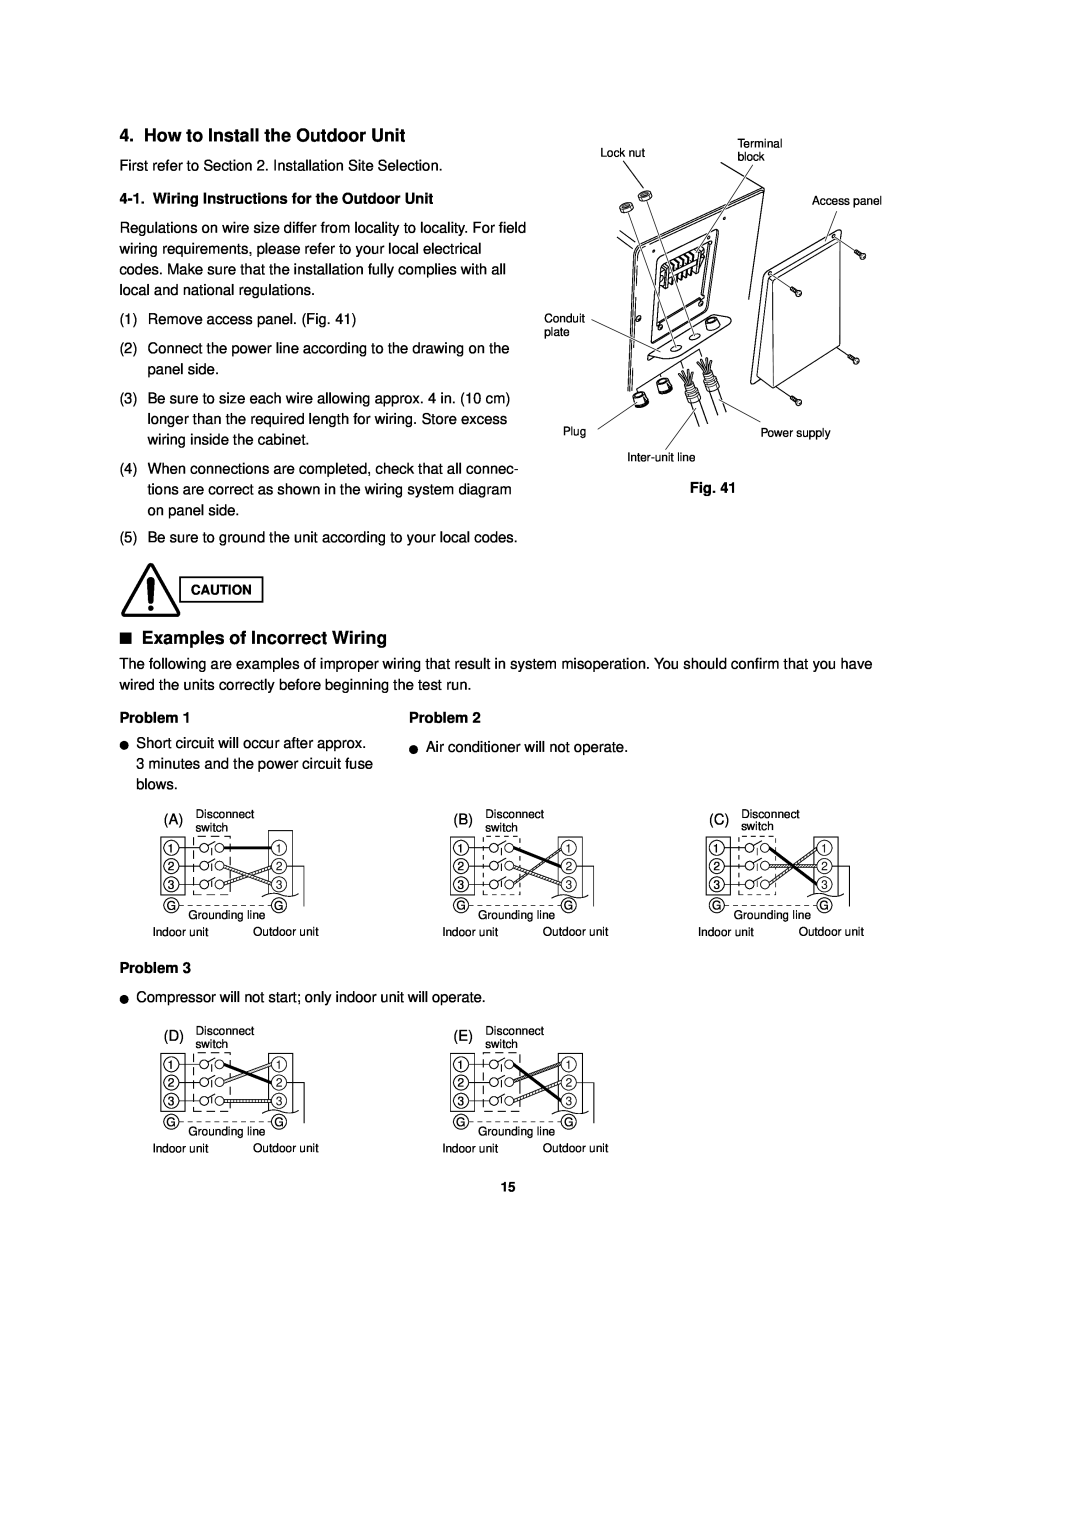 Sanyo CL1852 How to Install the Outdoor Unit, Examples of Incorrect Wiring, Wiring Instructions for the Outdoor Unit 